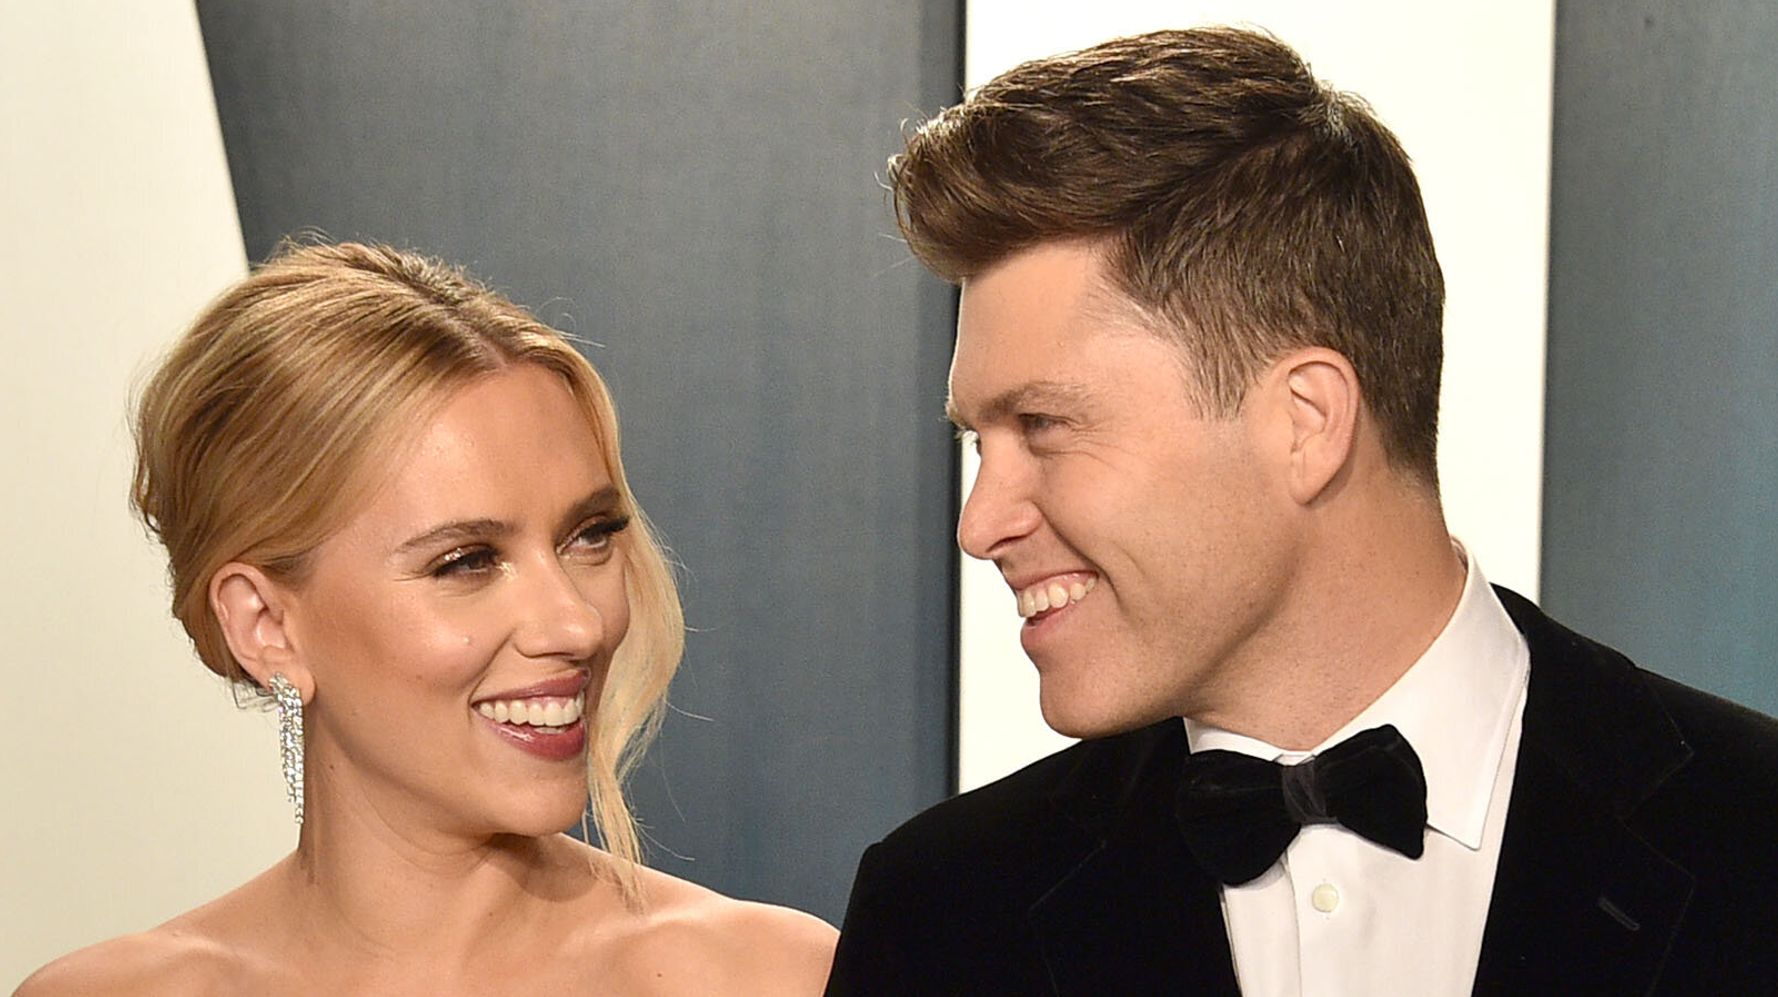 Scarlett Johansson And Colin Jost Are ‘Jost Married’ After Intimate Wedding